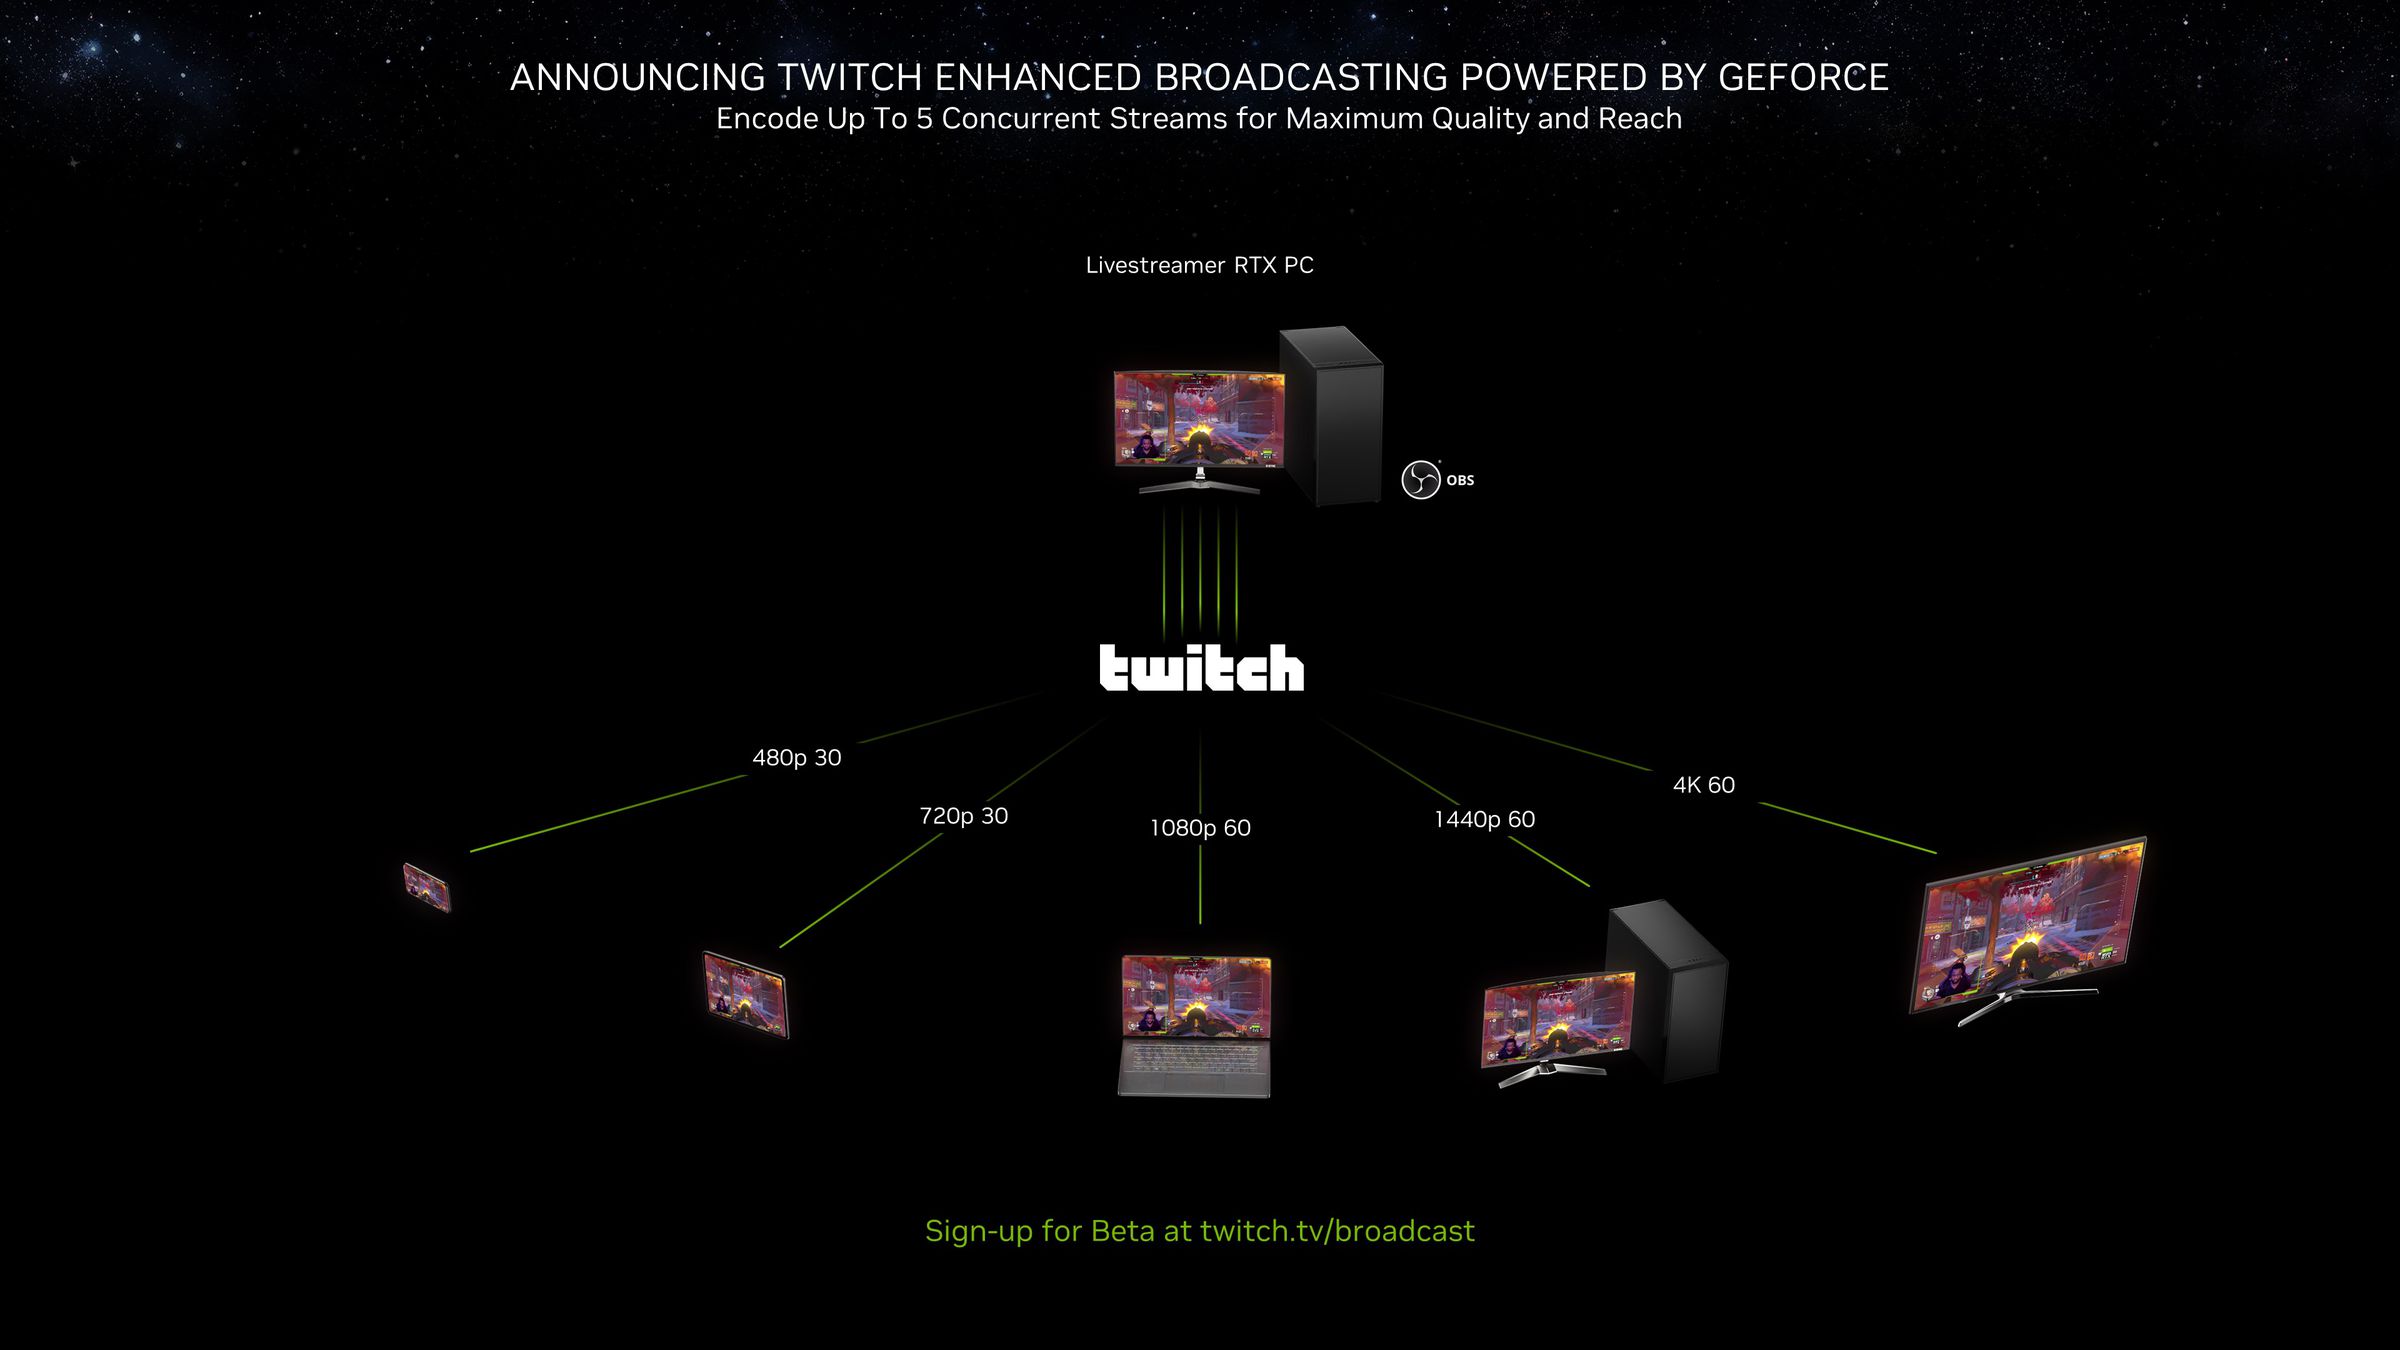 The new enhanced broadcasting feature for Twitch.